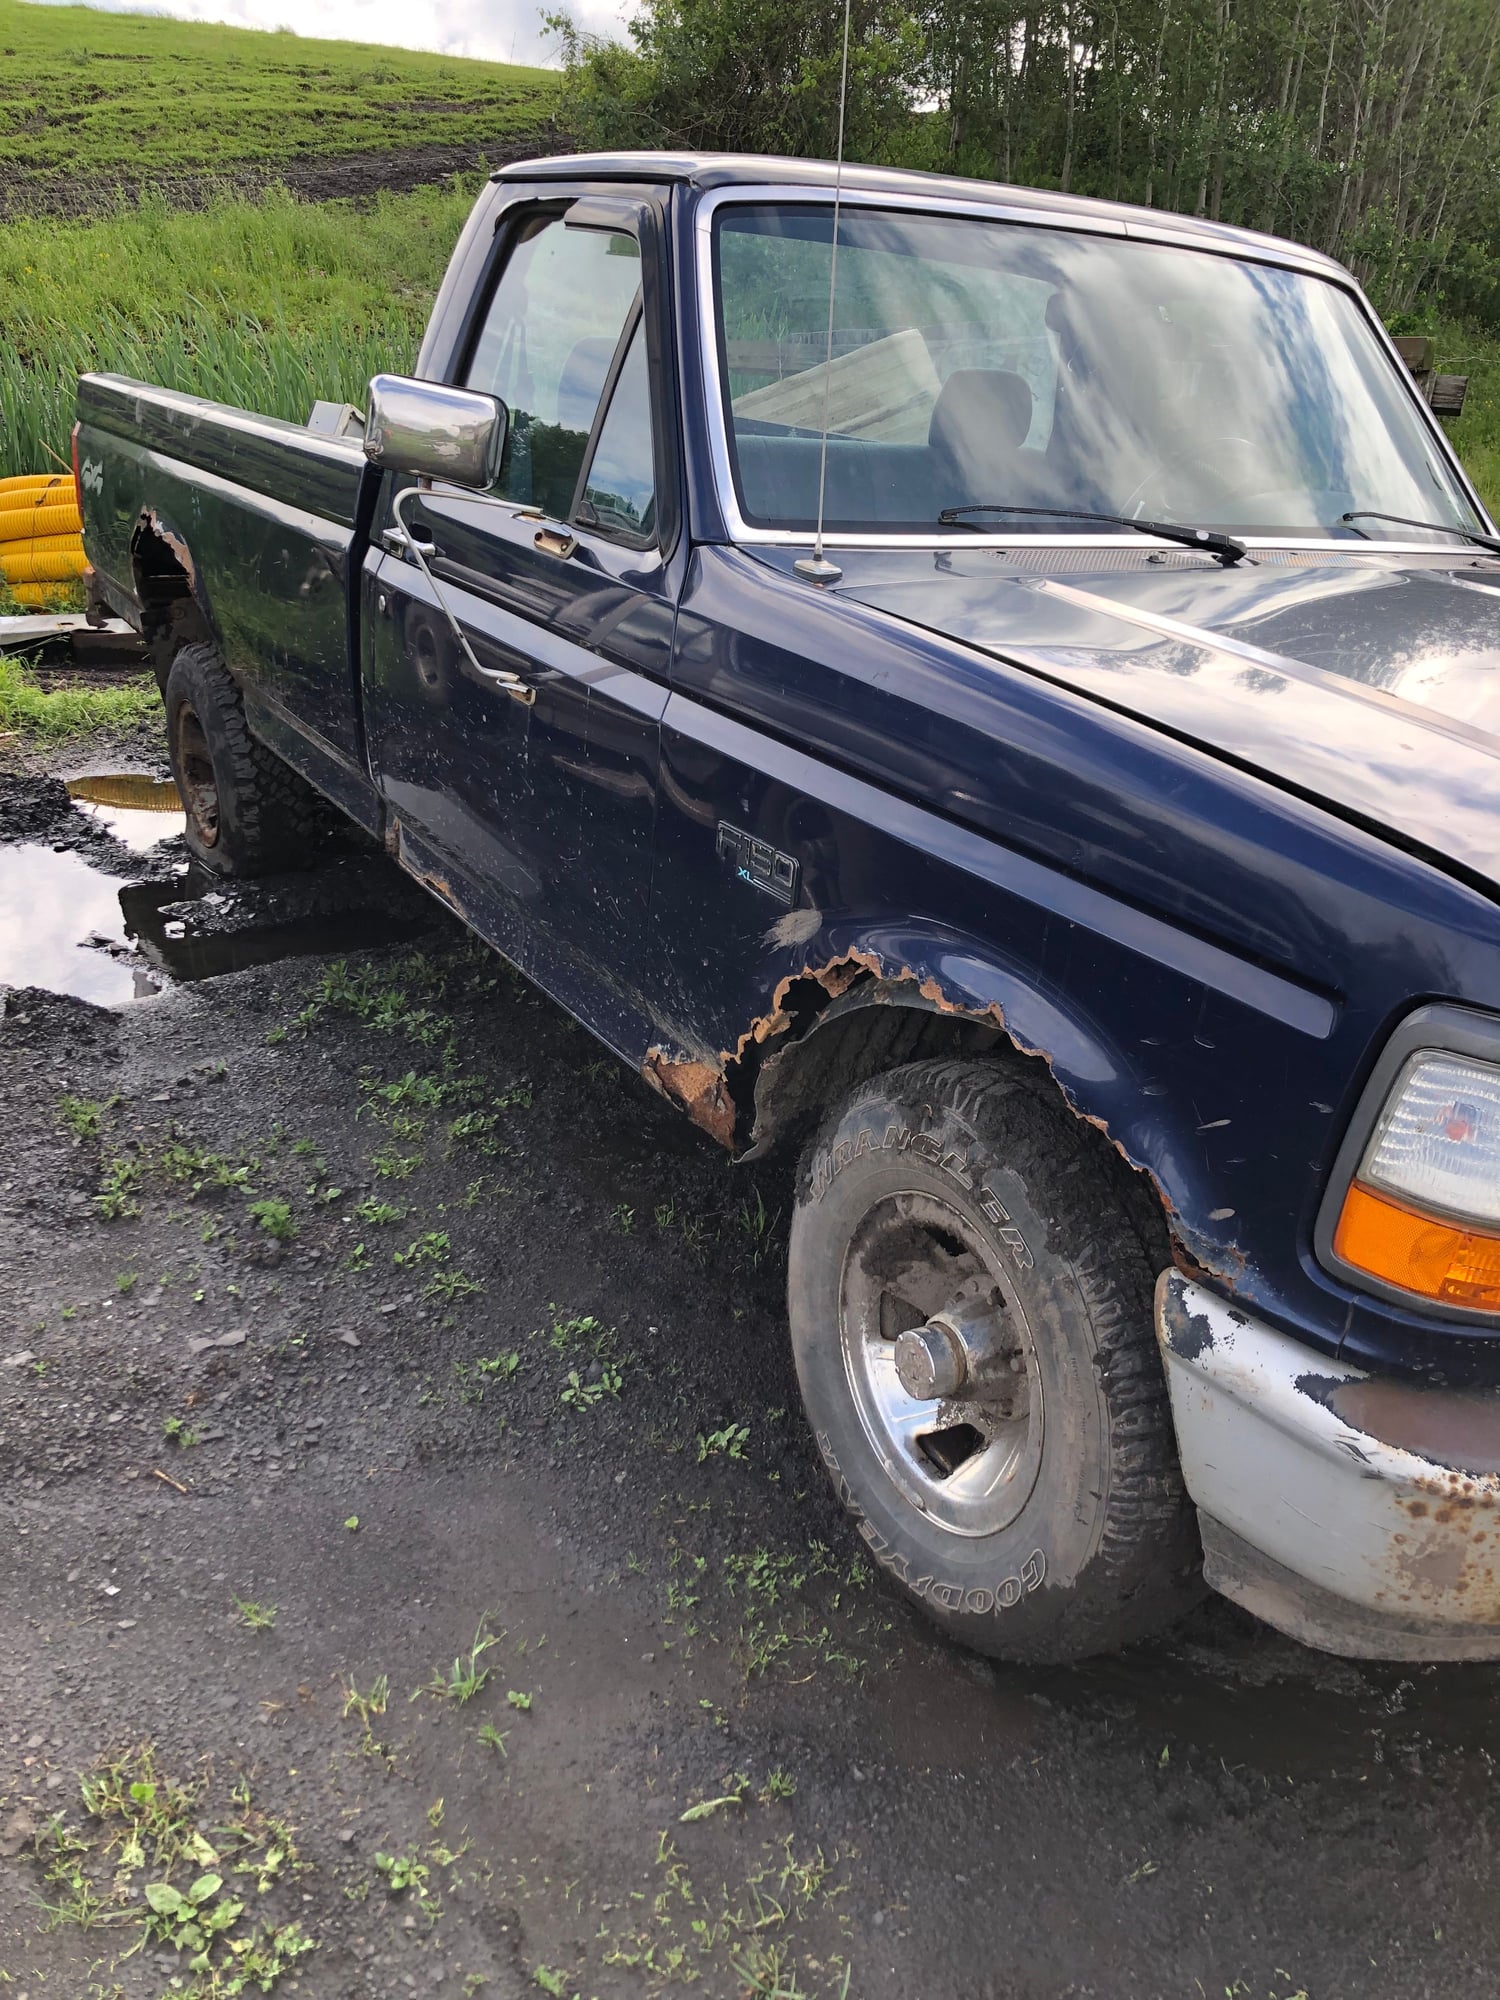 2014 Ford F-250 Super Duty - Parting out 95 f150 - Boonville, NY 13309, United States